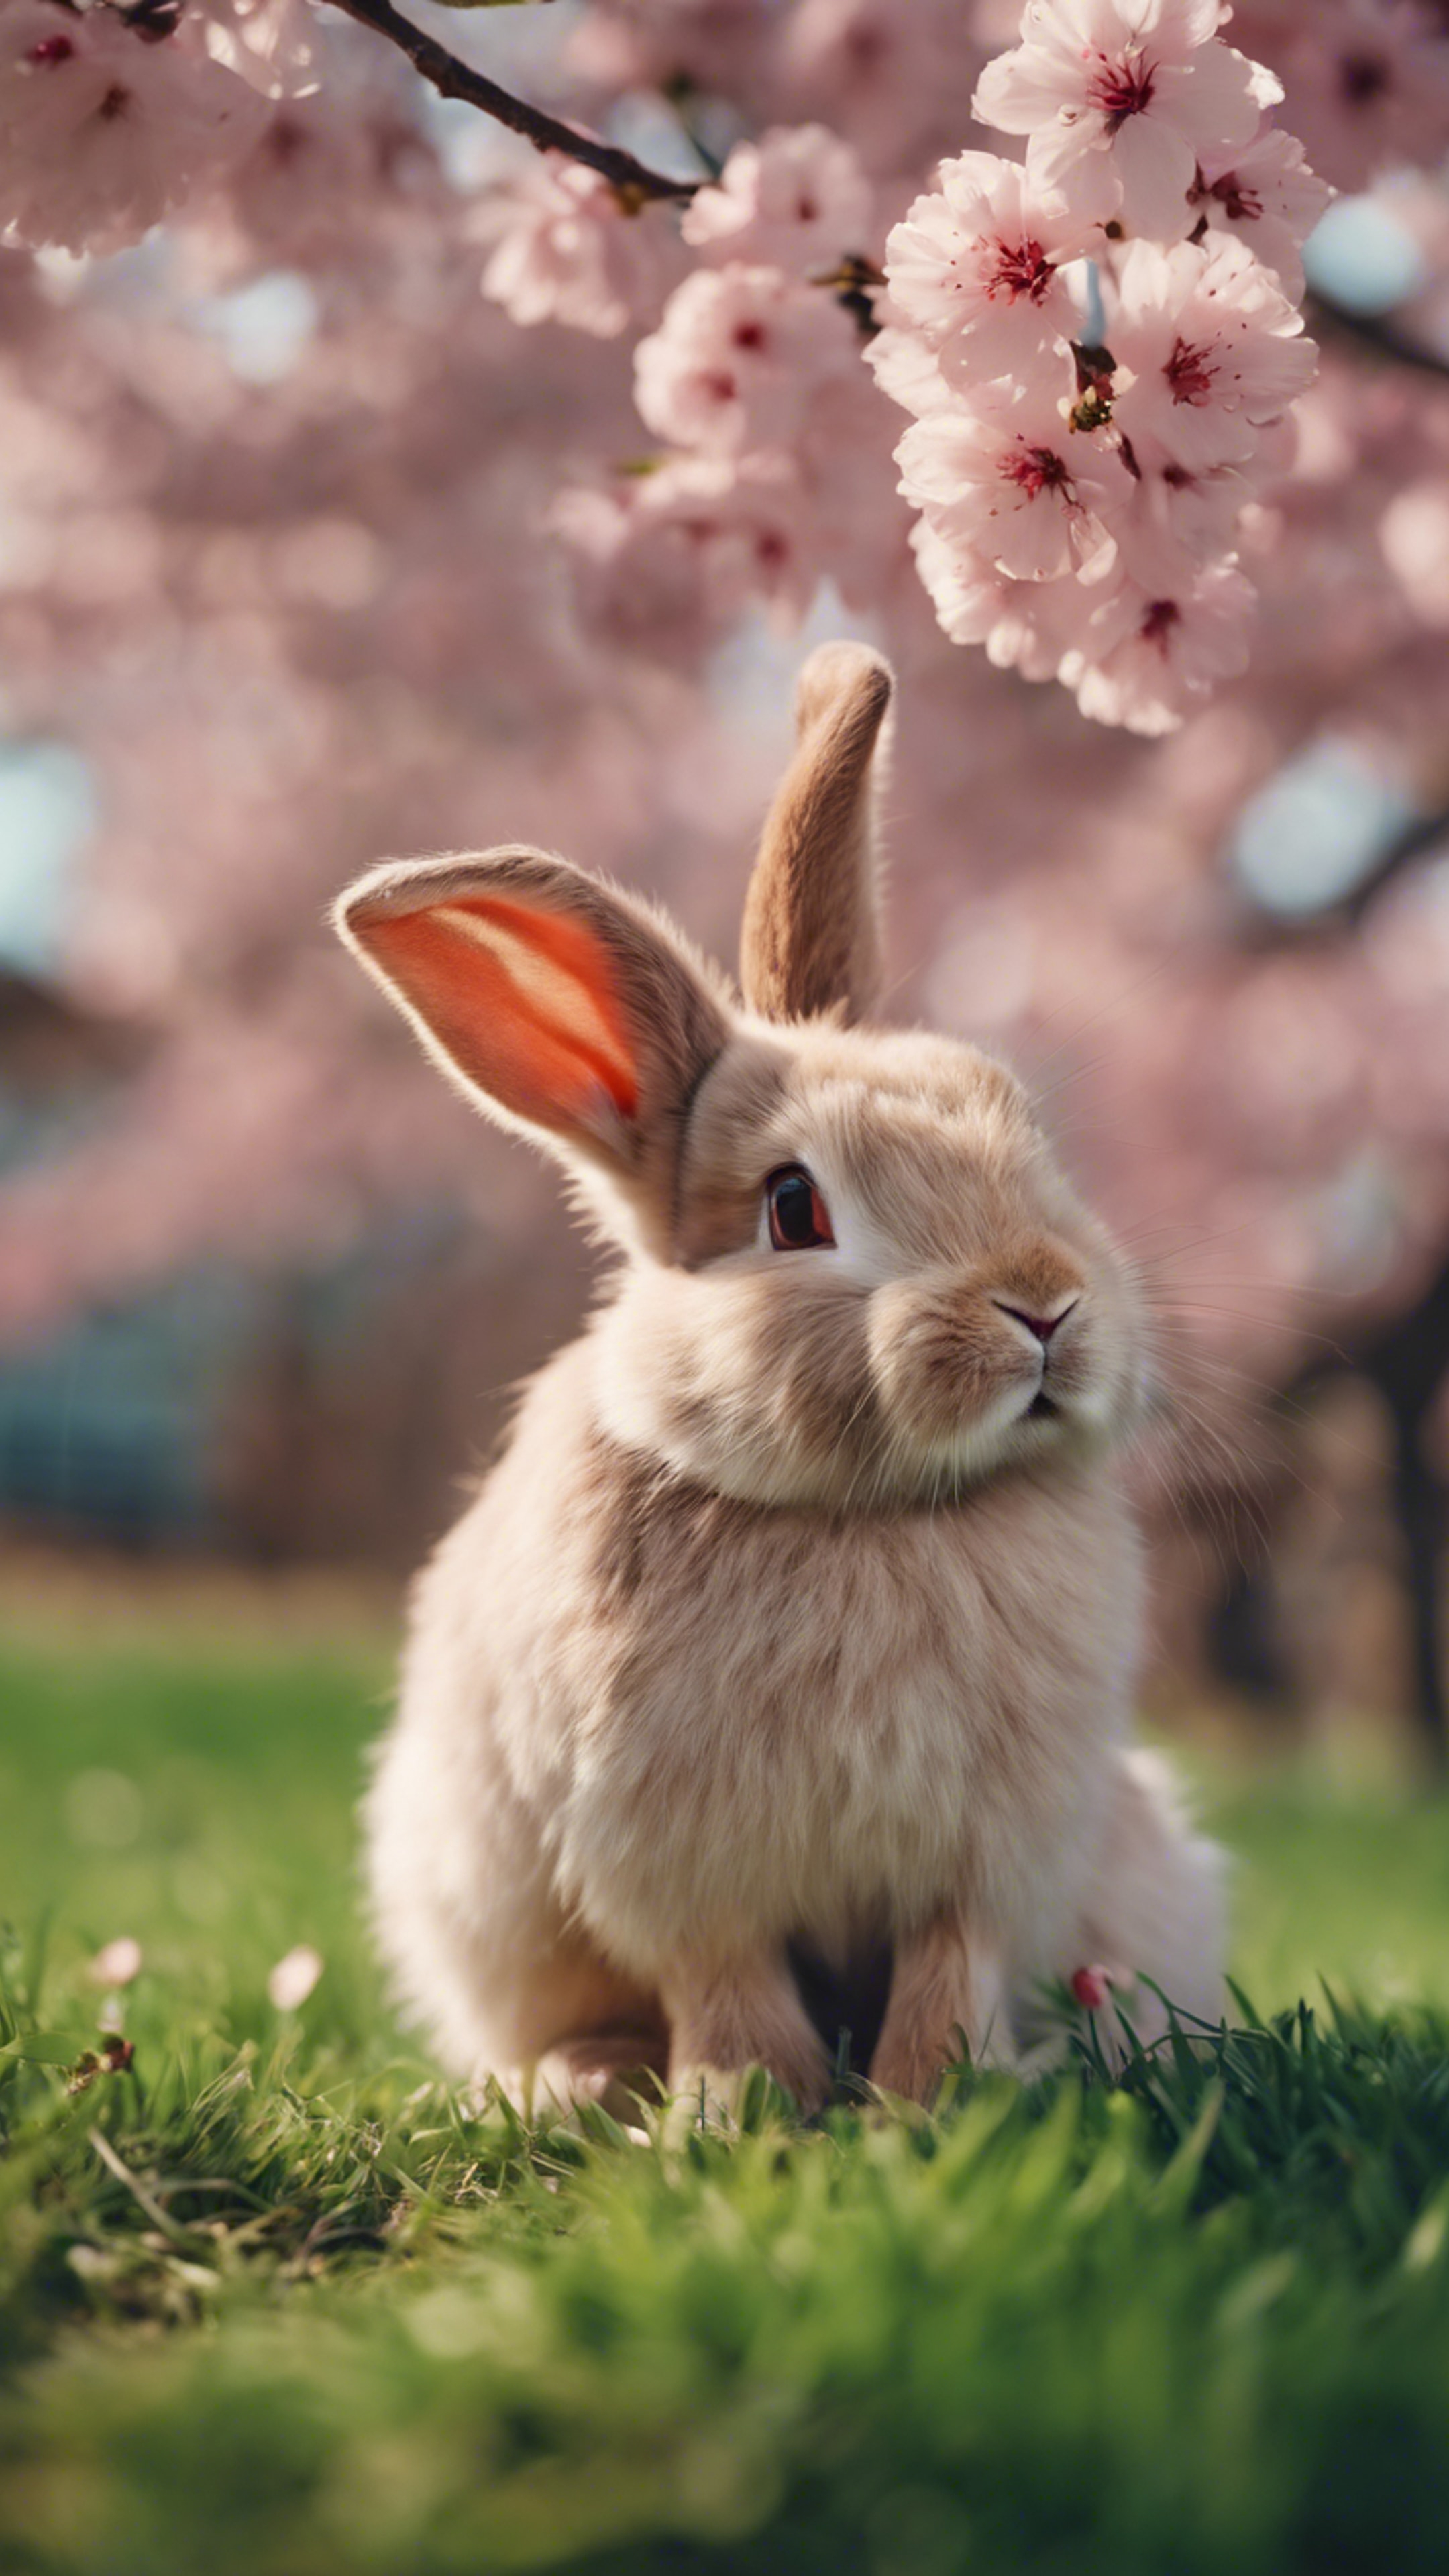 An adorable beige bunny wearing a red bow on its head, seated in a green field under a pink cherry blossom tree. Wallpaper[158bdbe2fb0e44ca96b2]